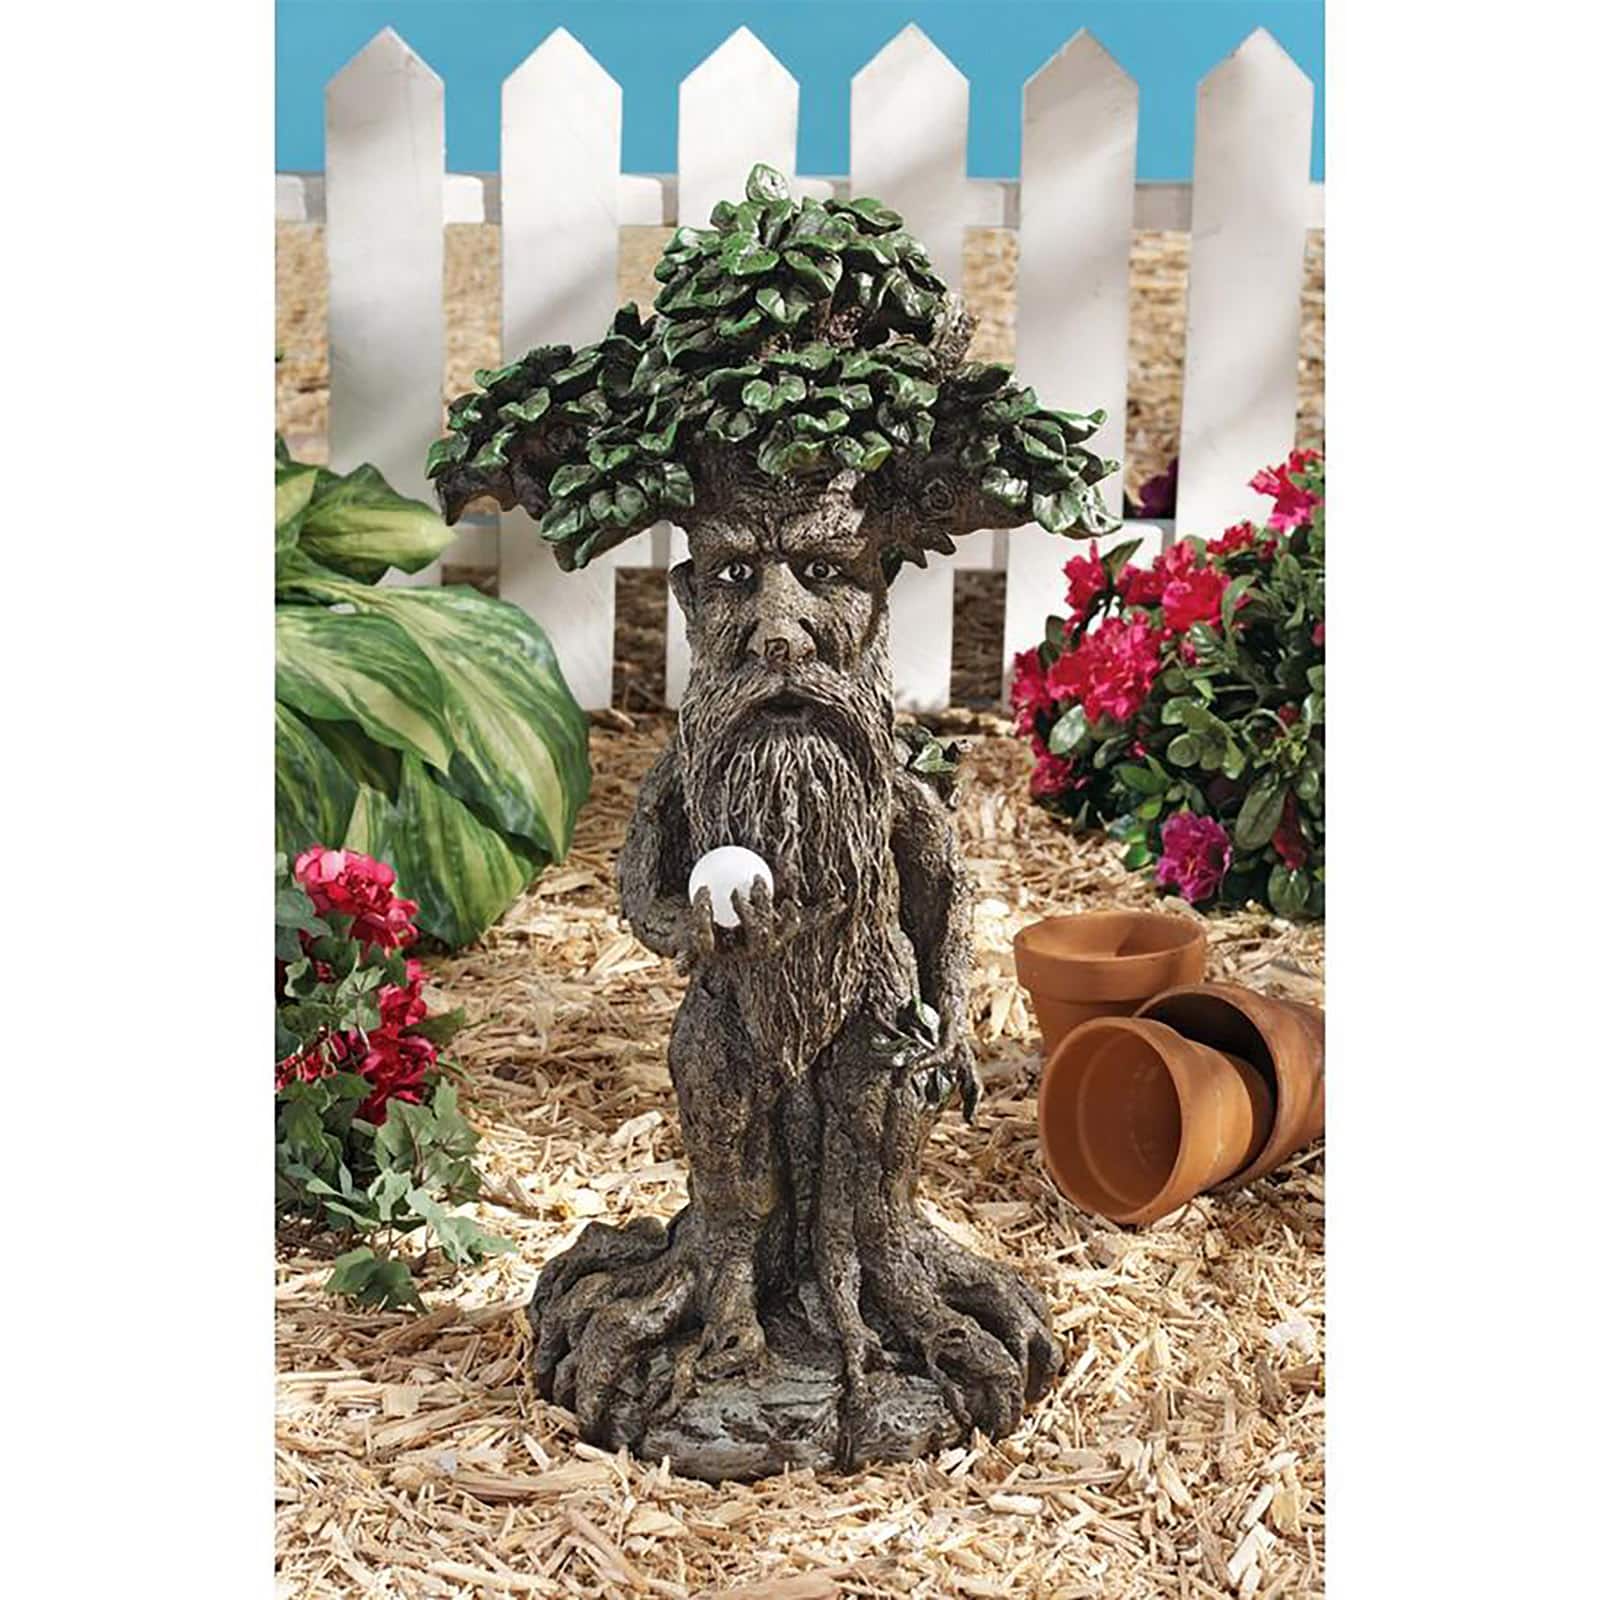 Design Toscano Treebeard Ent with Mystical Orb Statue